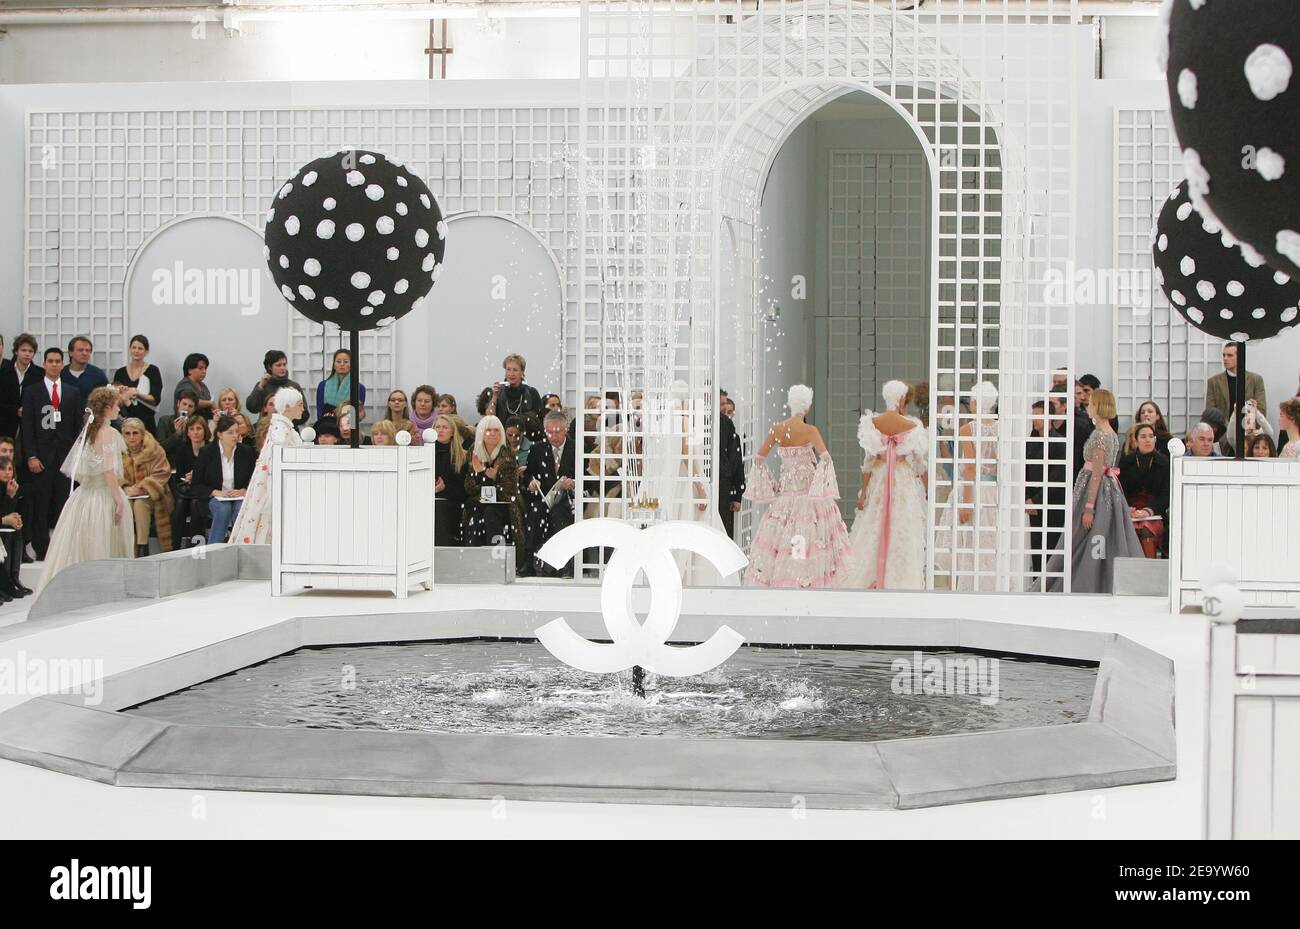 German designer Karl Lagerfeld flanked by models on the runway of the Chanel Haute-Couture Spring-Summer 2005 collection presentation in Paris, France, January 25, 2005. Photo by Java/ABACA Stock Photo